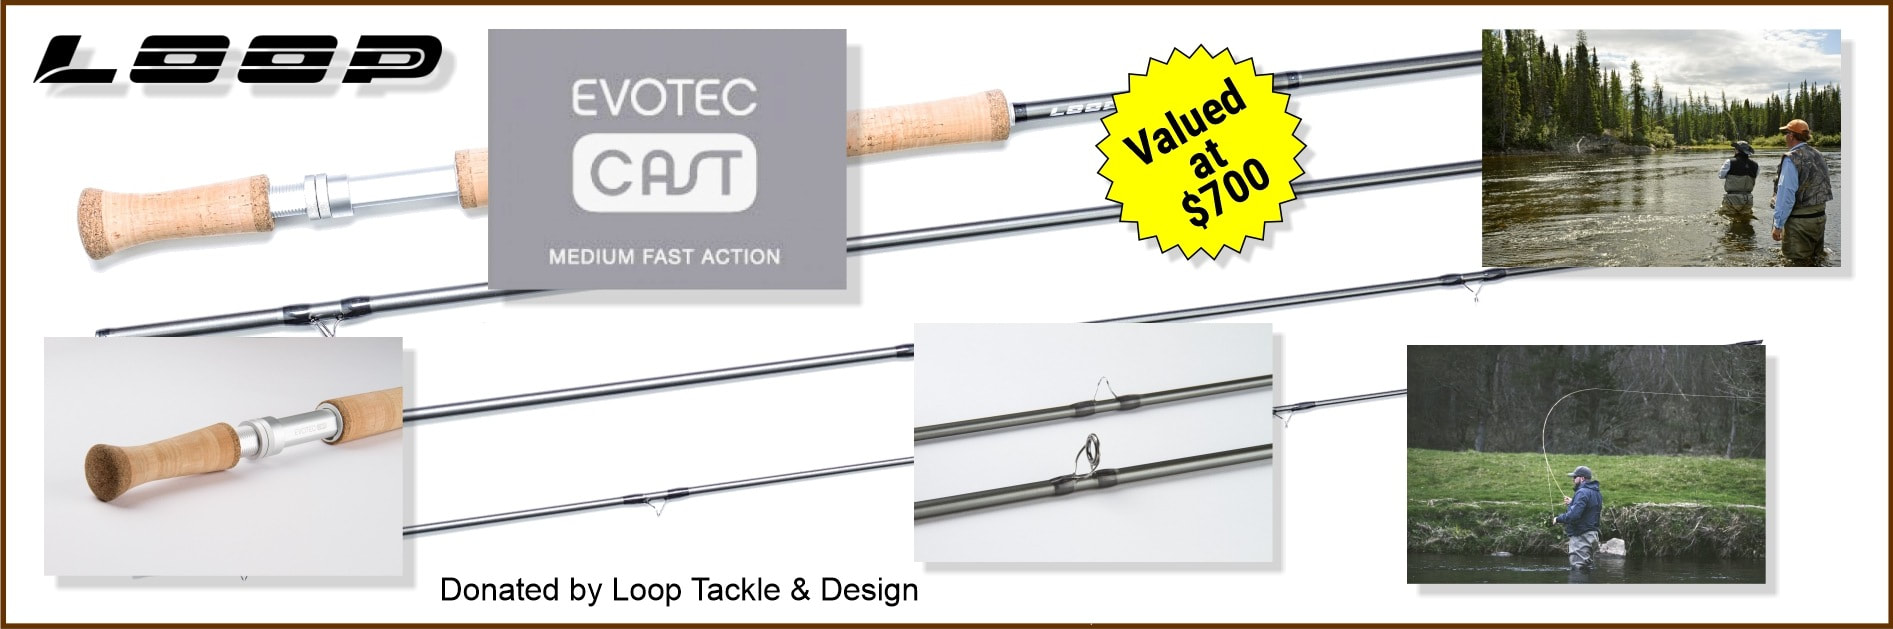 Second Prize - A Loop Evotec Cast Fly Rod